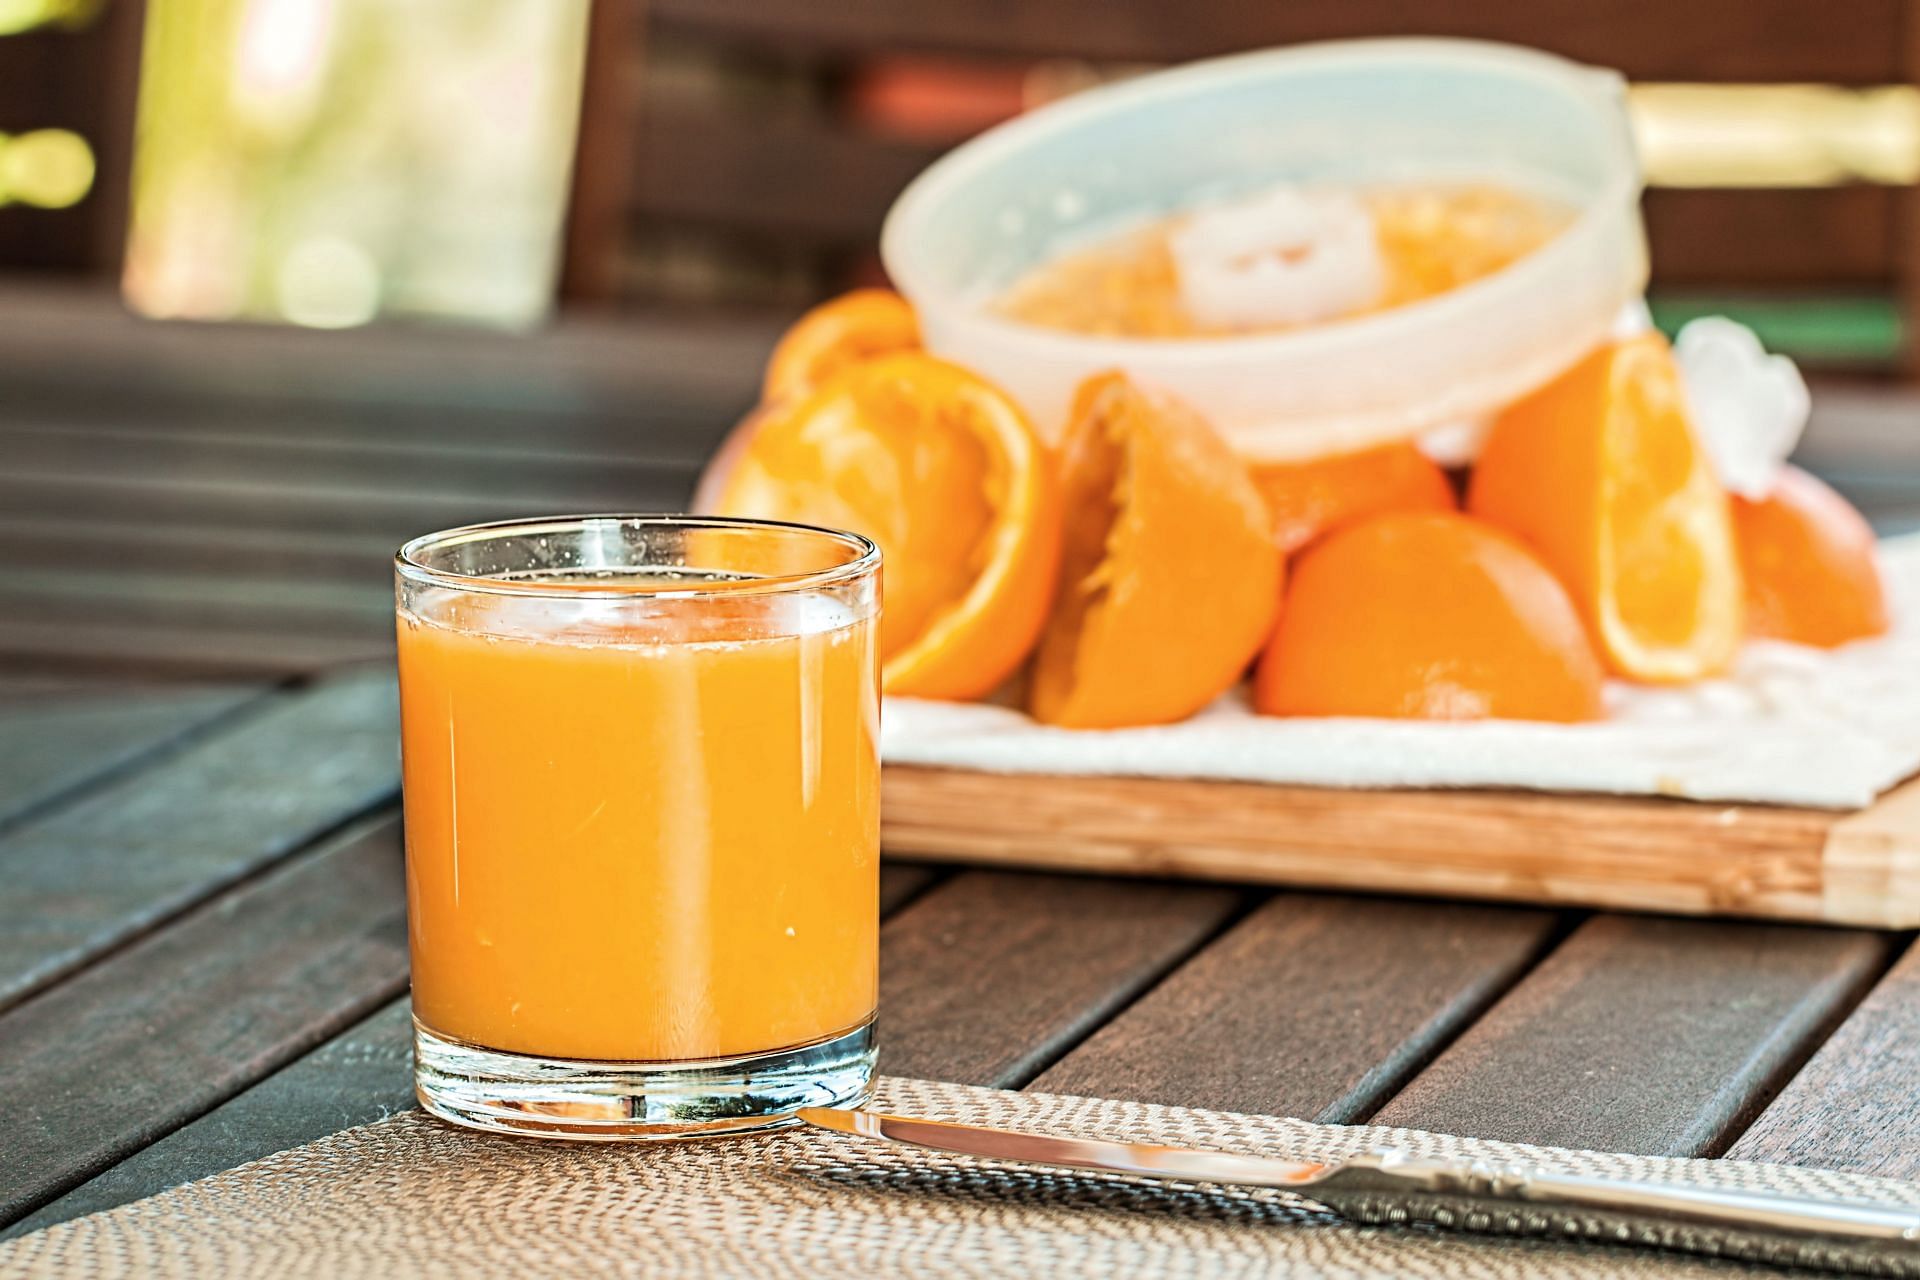 Is Orange Juice Good for Sore Throat? Check the facts. (Image by Pexels/ Pixabay)